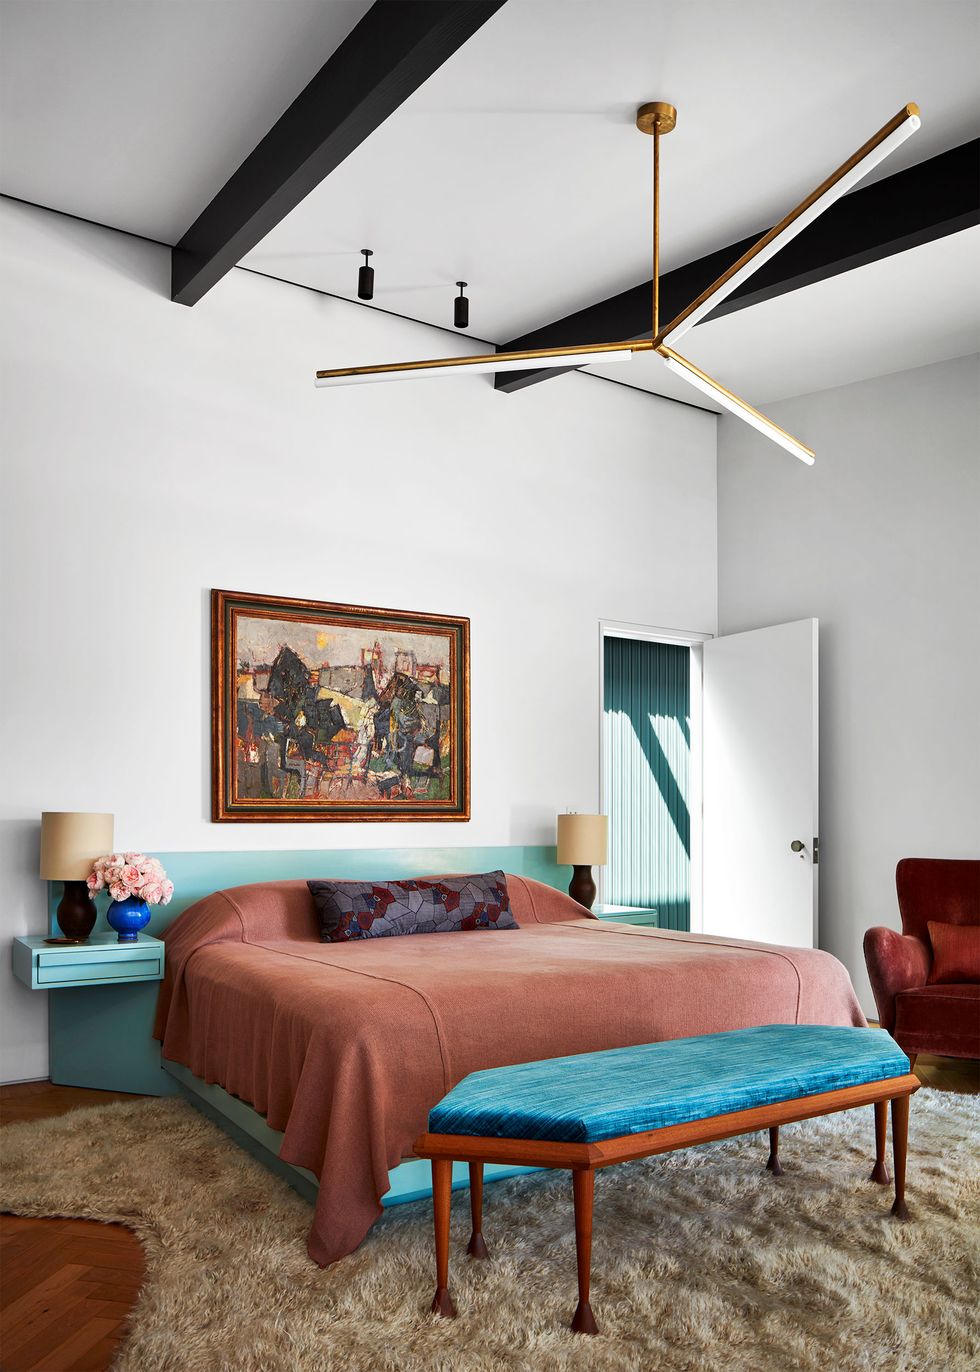 a primary bedroom has a light aqua platform bed with attached headboard and side tables with lamps, a bench with wood base and deep turquoise fabric seat, a painting above bed, and a beige shag rug